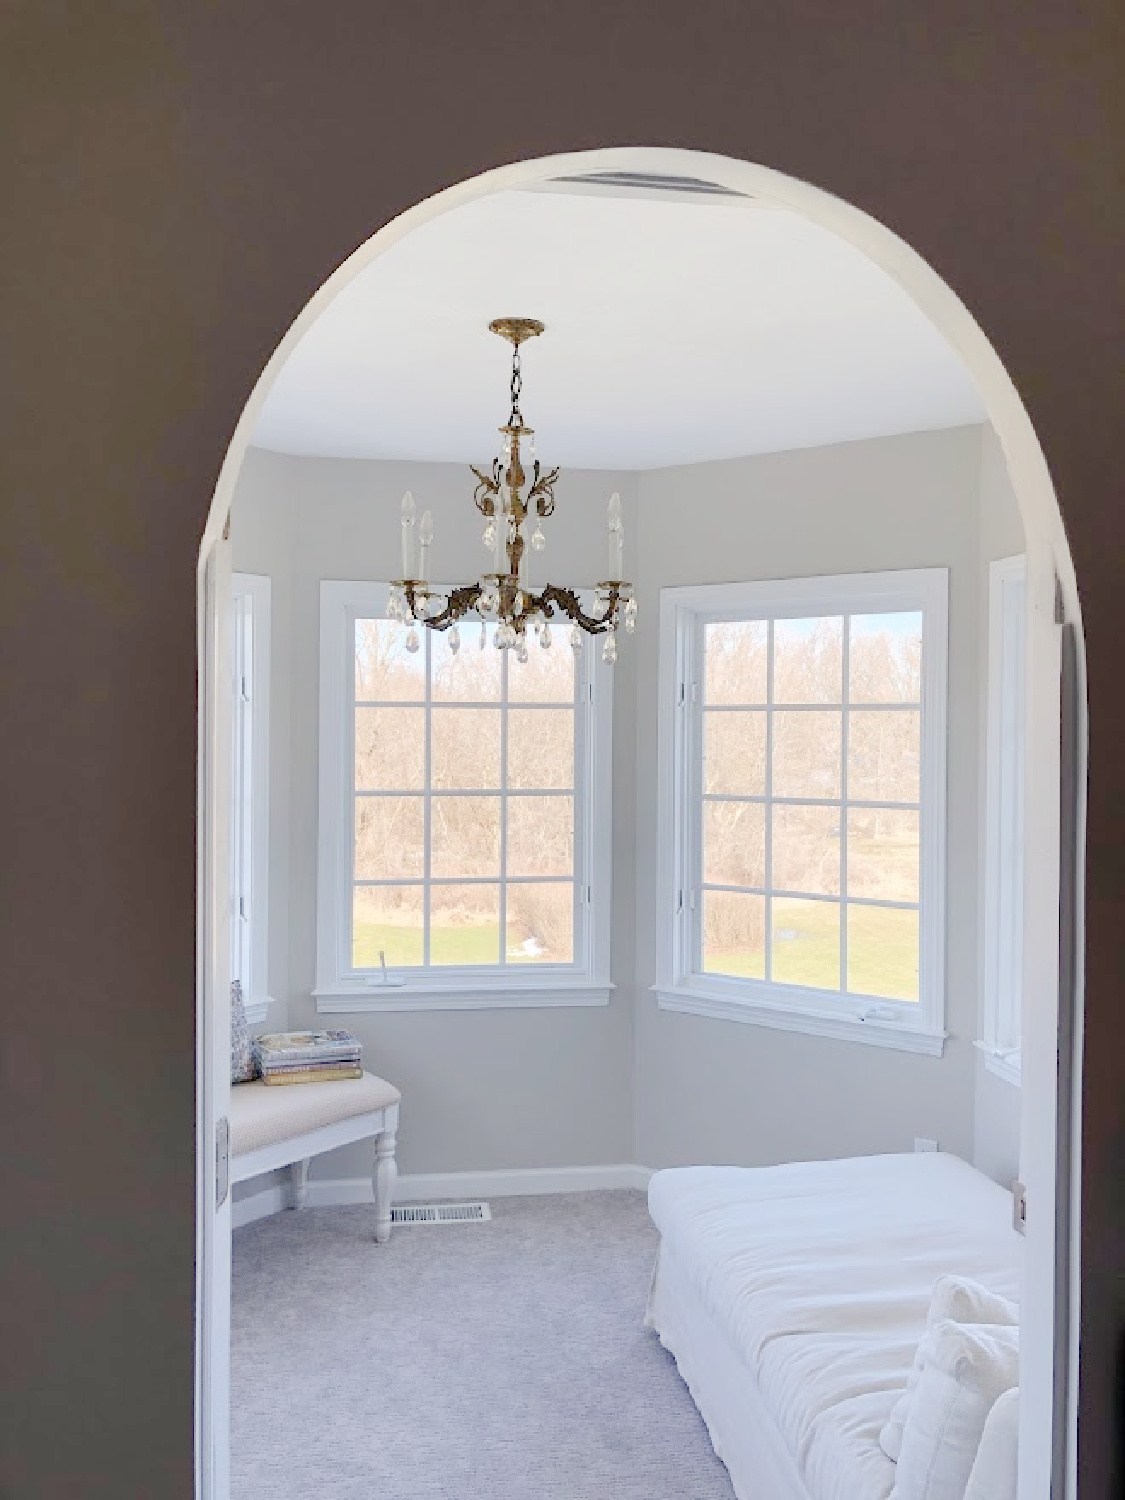 Arched doorway to turret sitting room with chandelier and linen chaise in coastal bedroom remodel (SW Agreeable Gray on walls) at the Georgian - Hello Lovely Studio. #agreeablegray #swagreeablegray